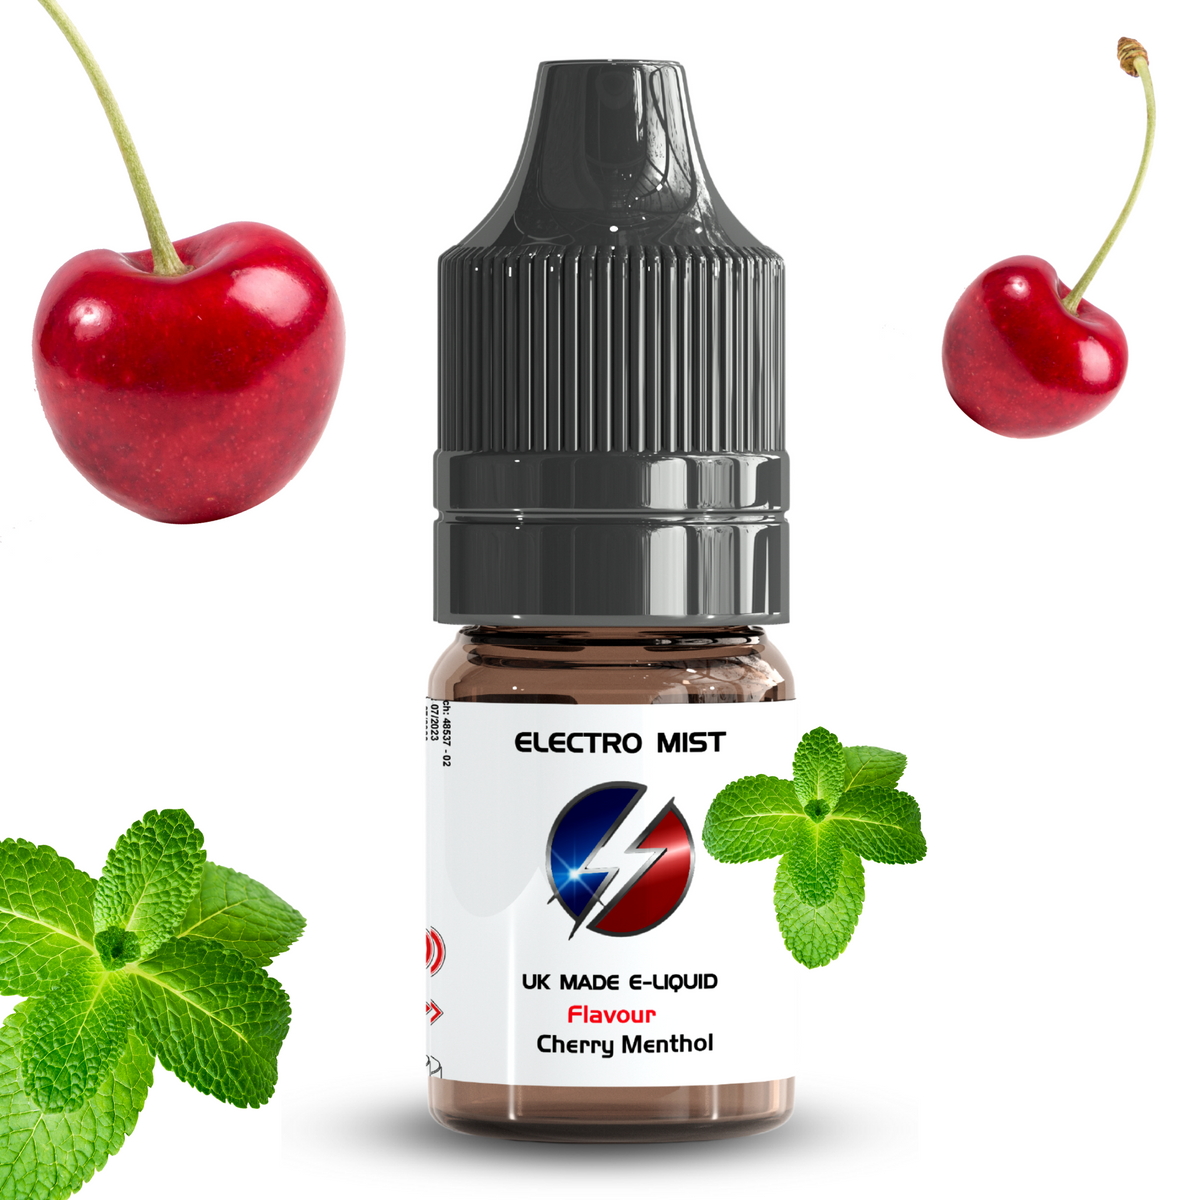 Electromist, the e-liquid brand you can trust. Get your taste buds ready for a flavour sensation, Cherry Menthol. Nicotine Content: 3mg/6mg/12mg. Products may contain nicotine. For over 18s Only ejuice, vape pen, eliquid, e cigarette, 10ml, vaping, cloud, PG, VG, 60/40, vape liquid, Flavour